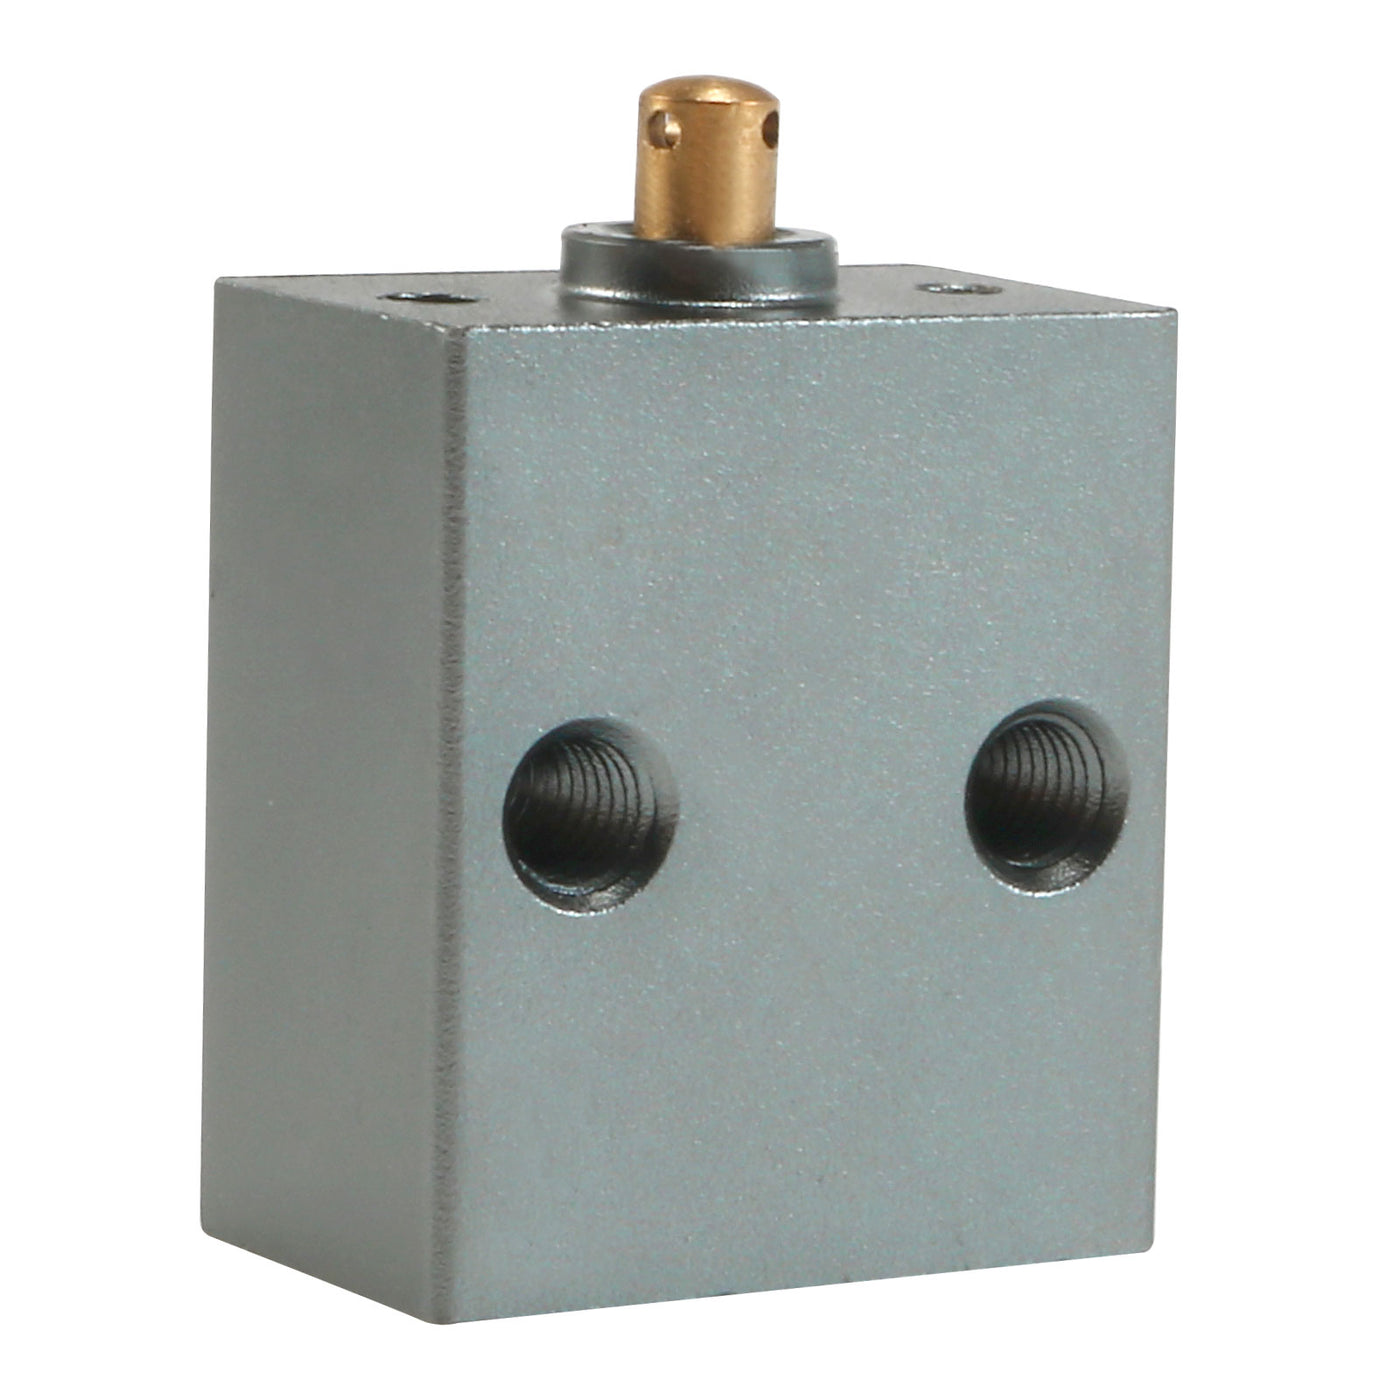 uxcell Uxcell S3B-M5 2 Position 3 Way M5 Manual Handle Control Pneumatic Solenoid Mechanical Valve